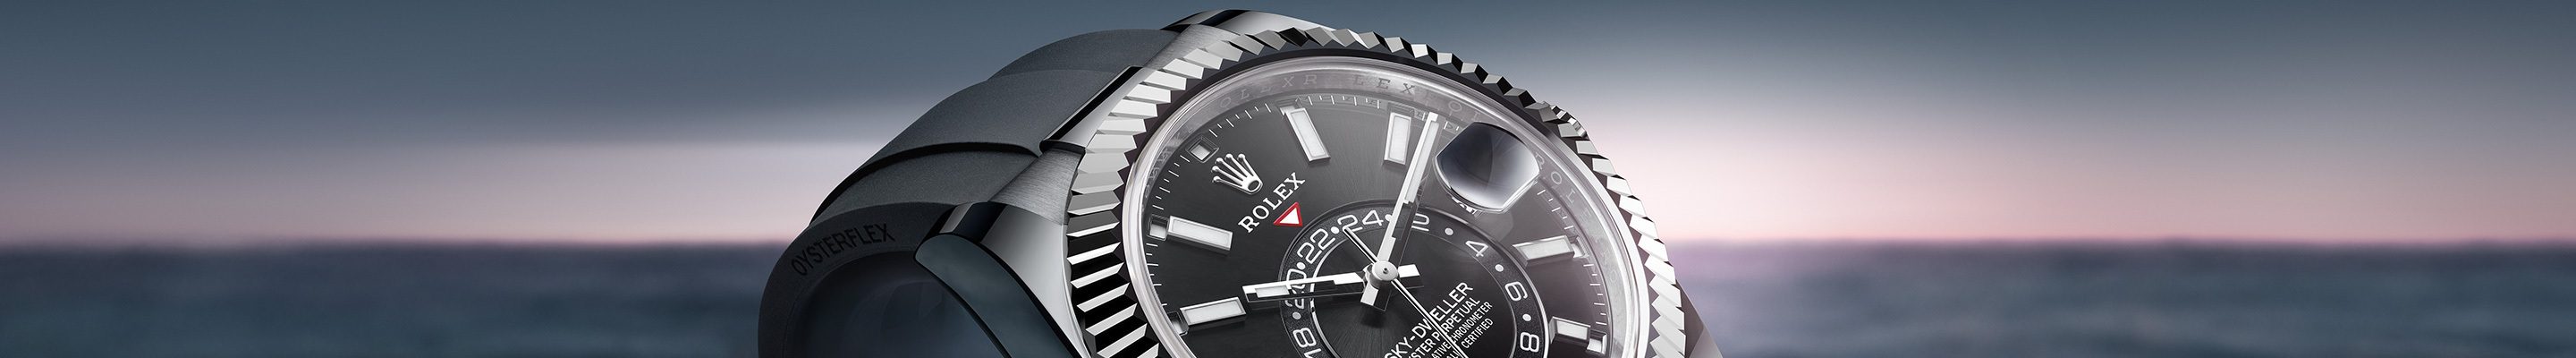 Sky-Dweller Oyster, 42 mm, white gold - M336239-0002 at Boutellier Montres